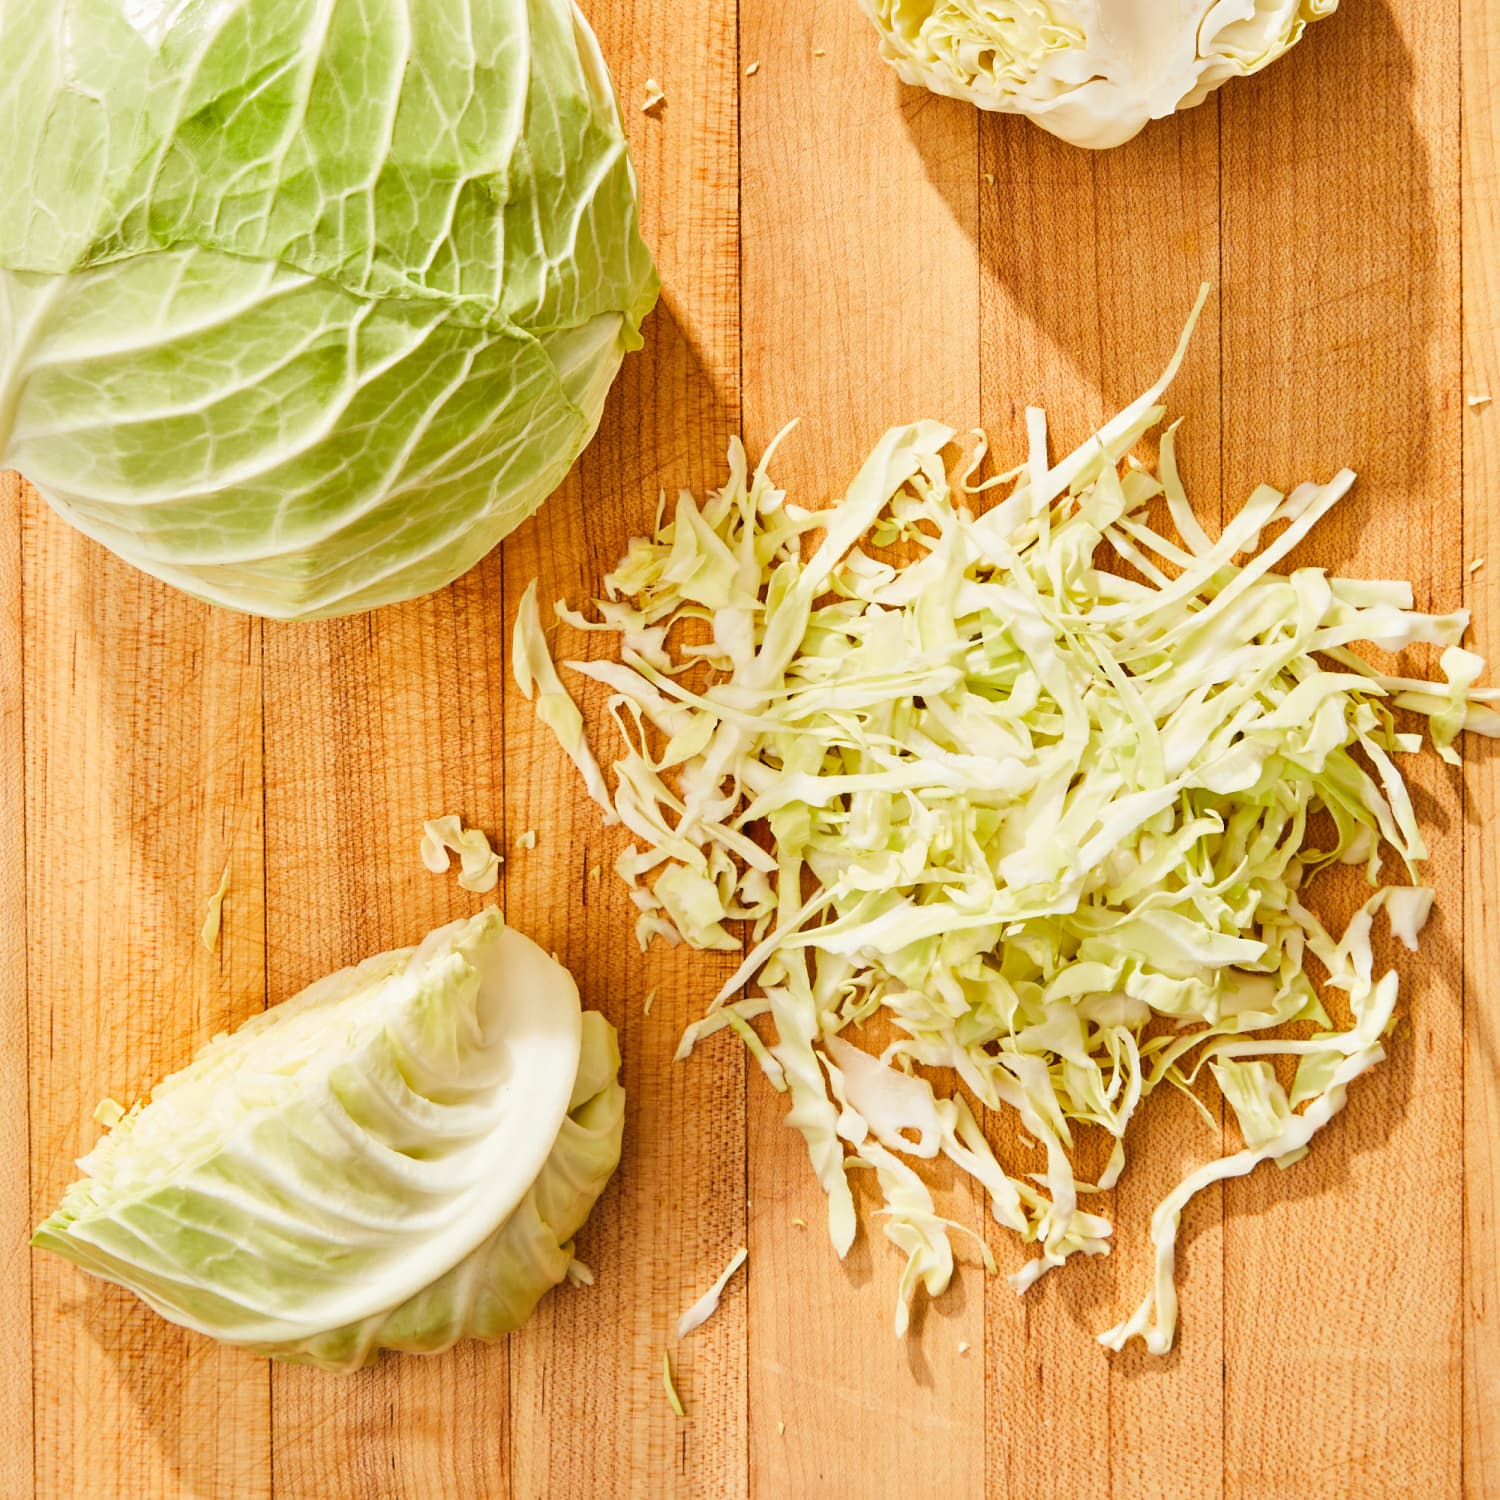 How to Shred Cabbage